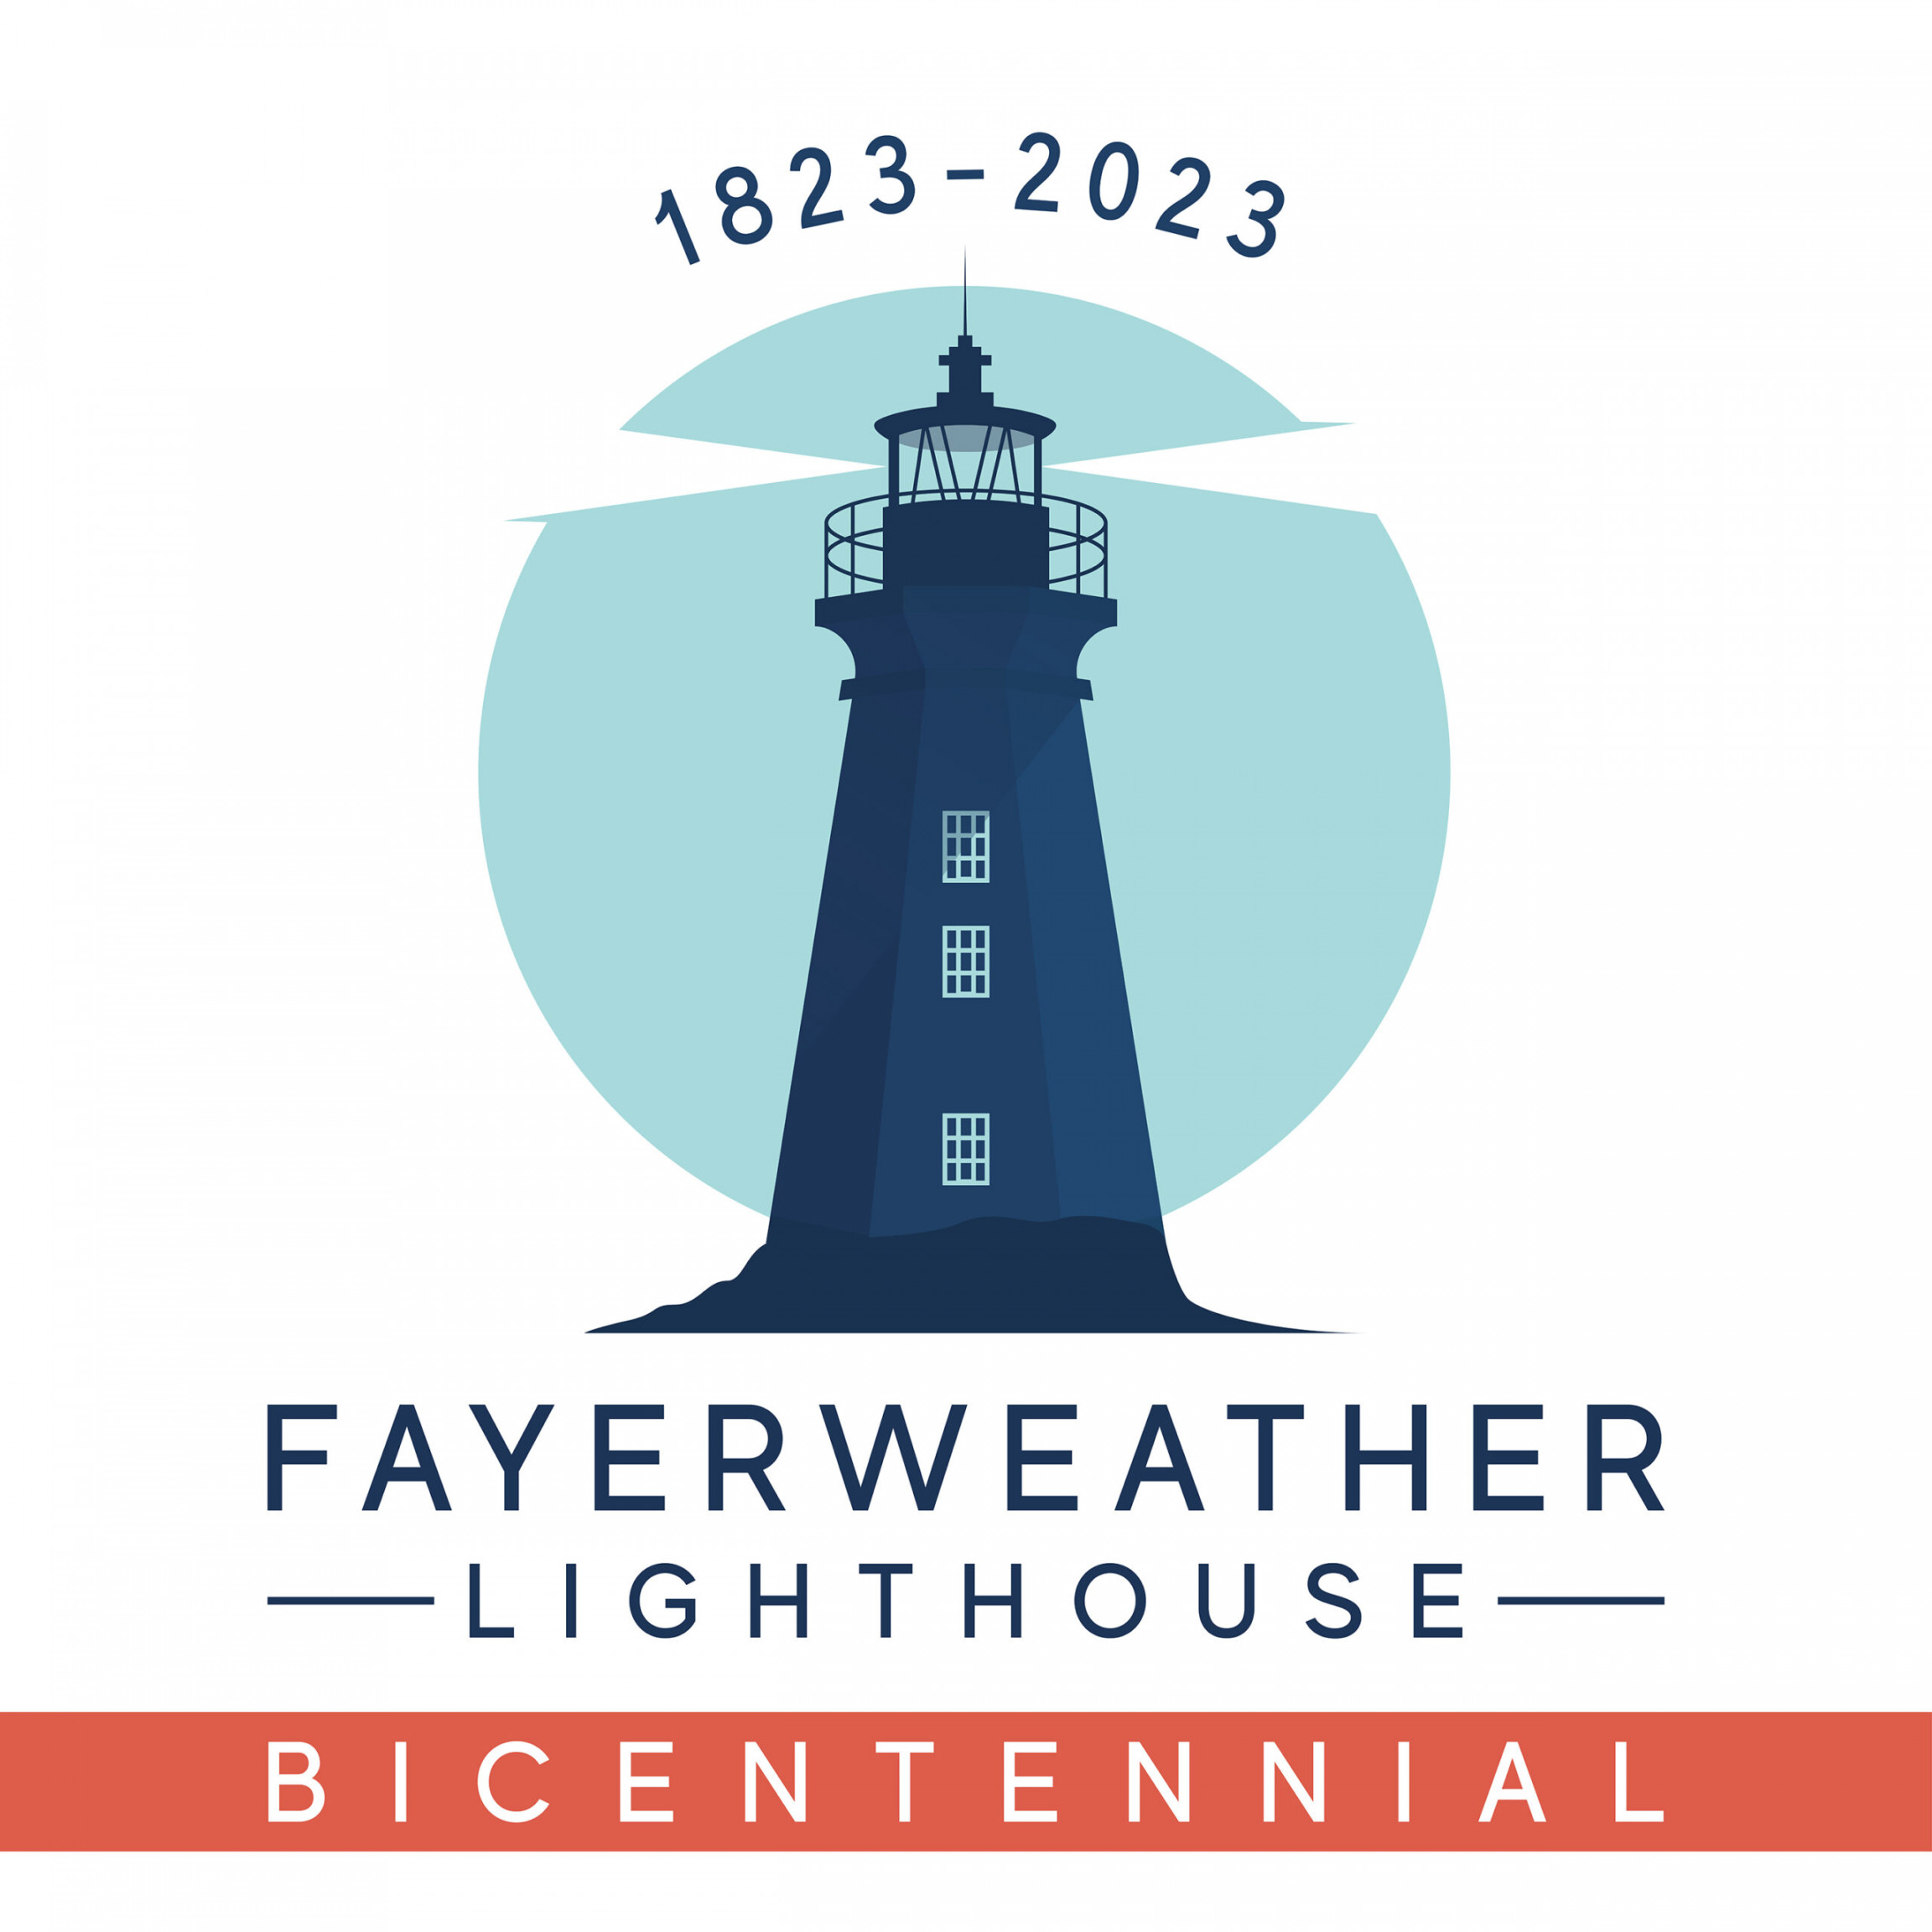 Fayerweather Lighthouse: Its Past, Present, and Future